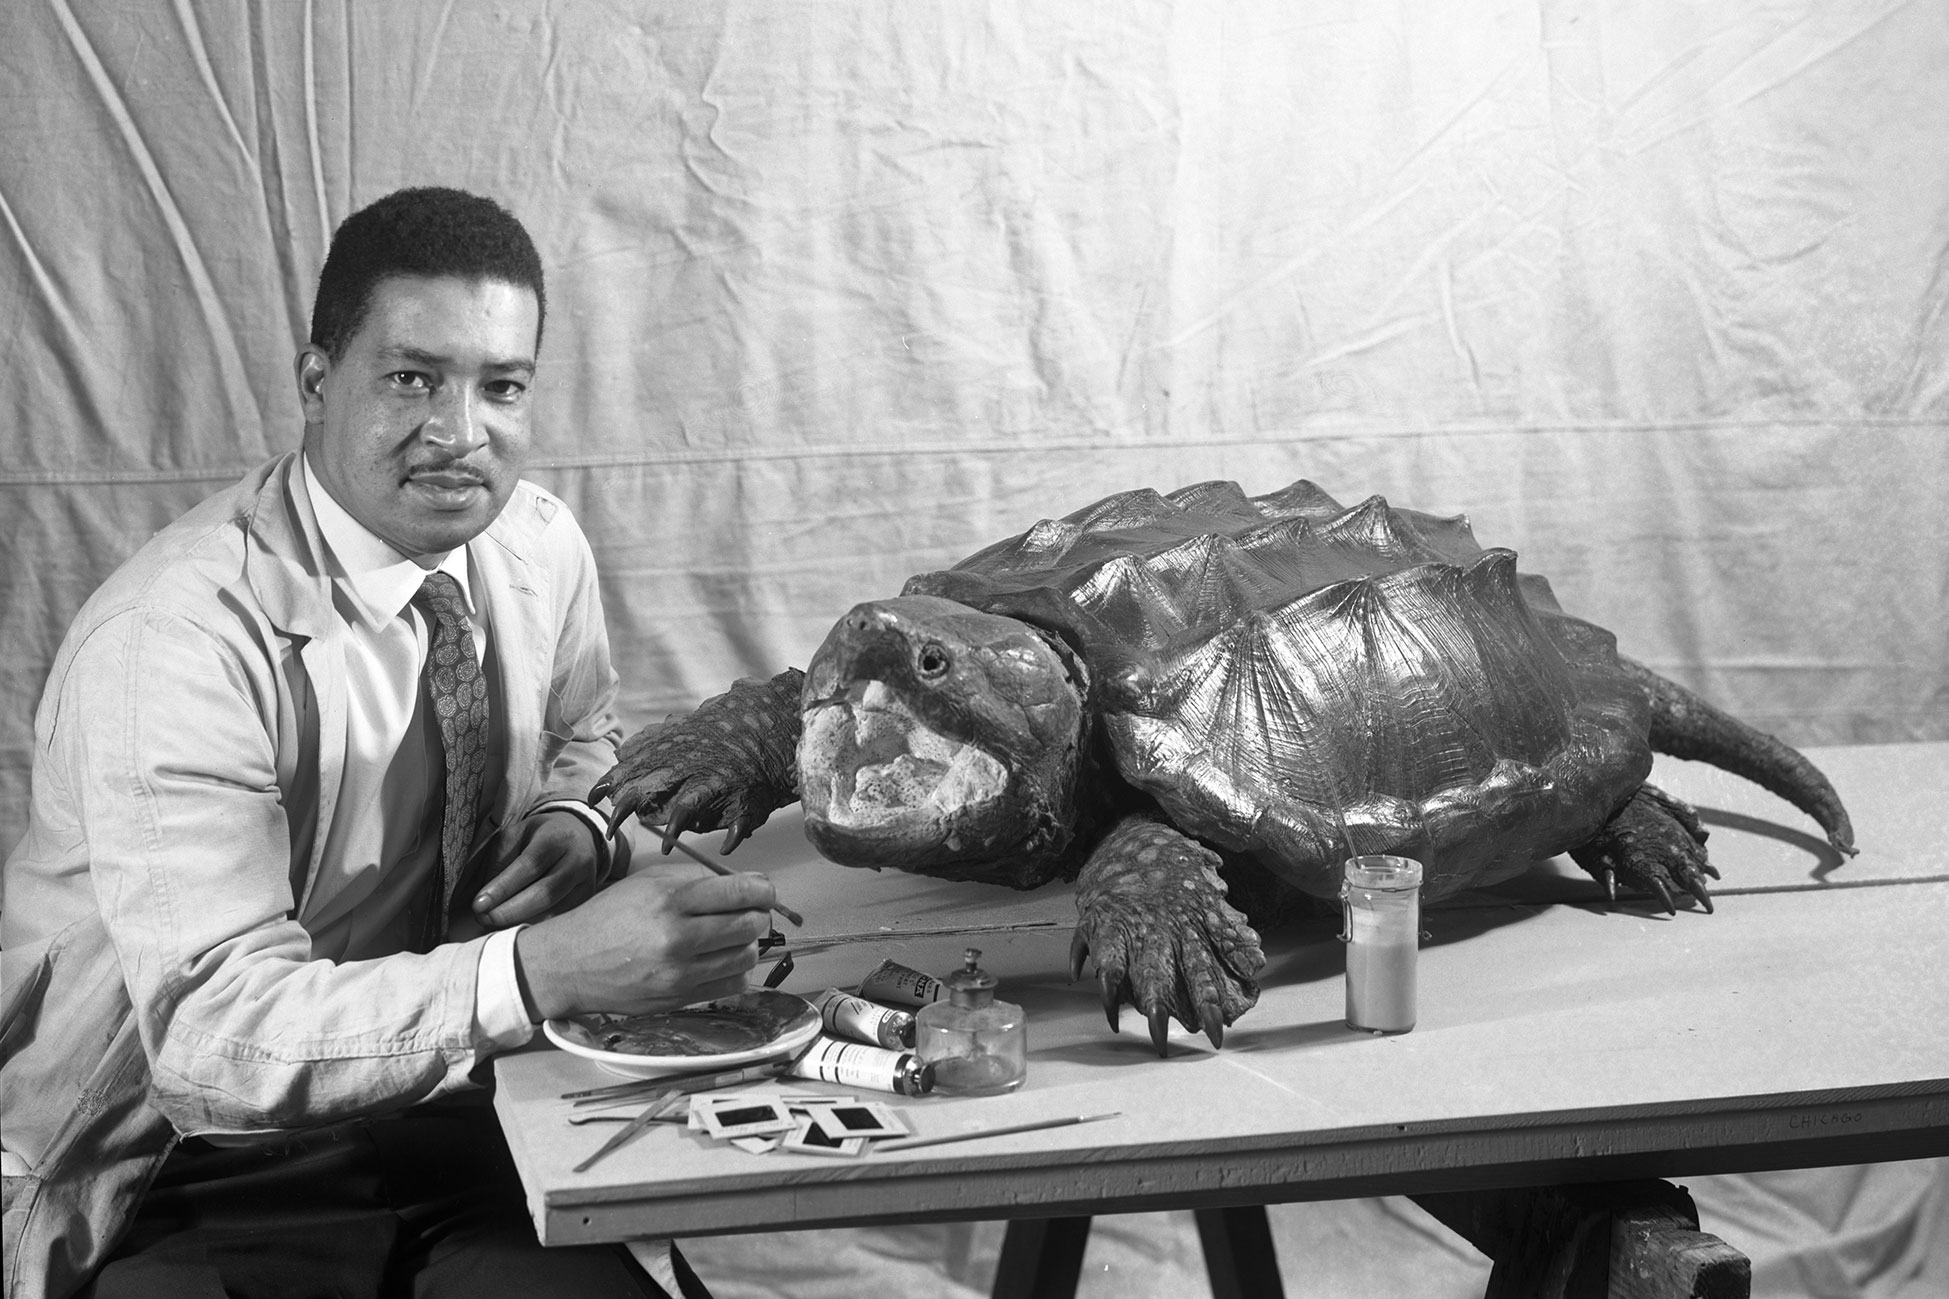 Carl Cotton, holding a paintbrush, sits at a table with various art supplies and a large model of a turtle.